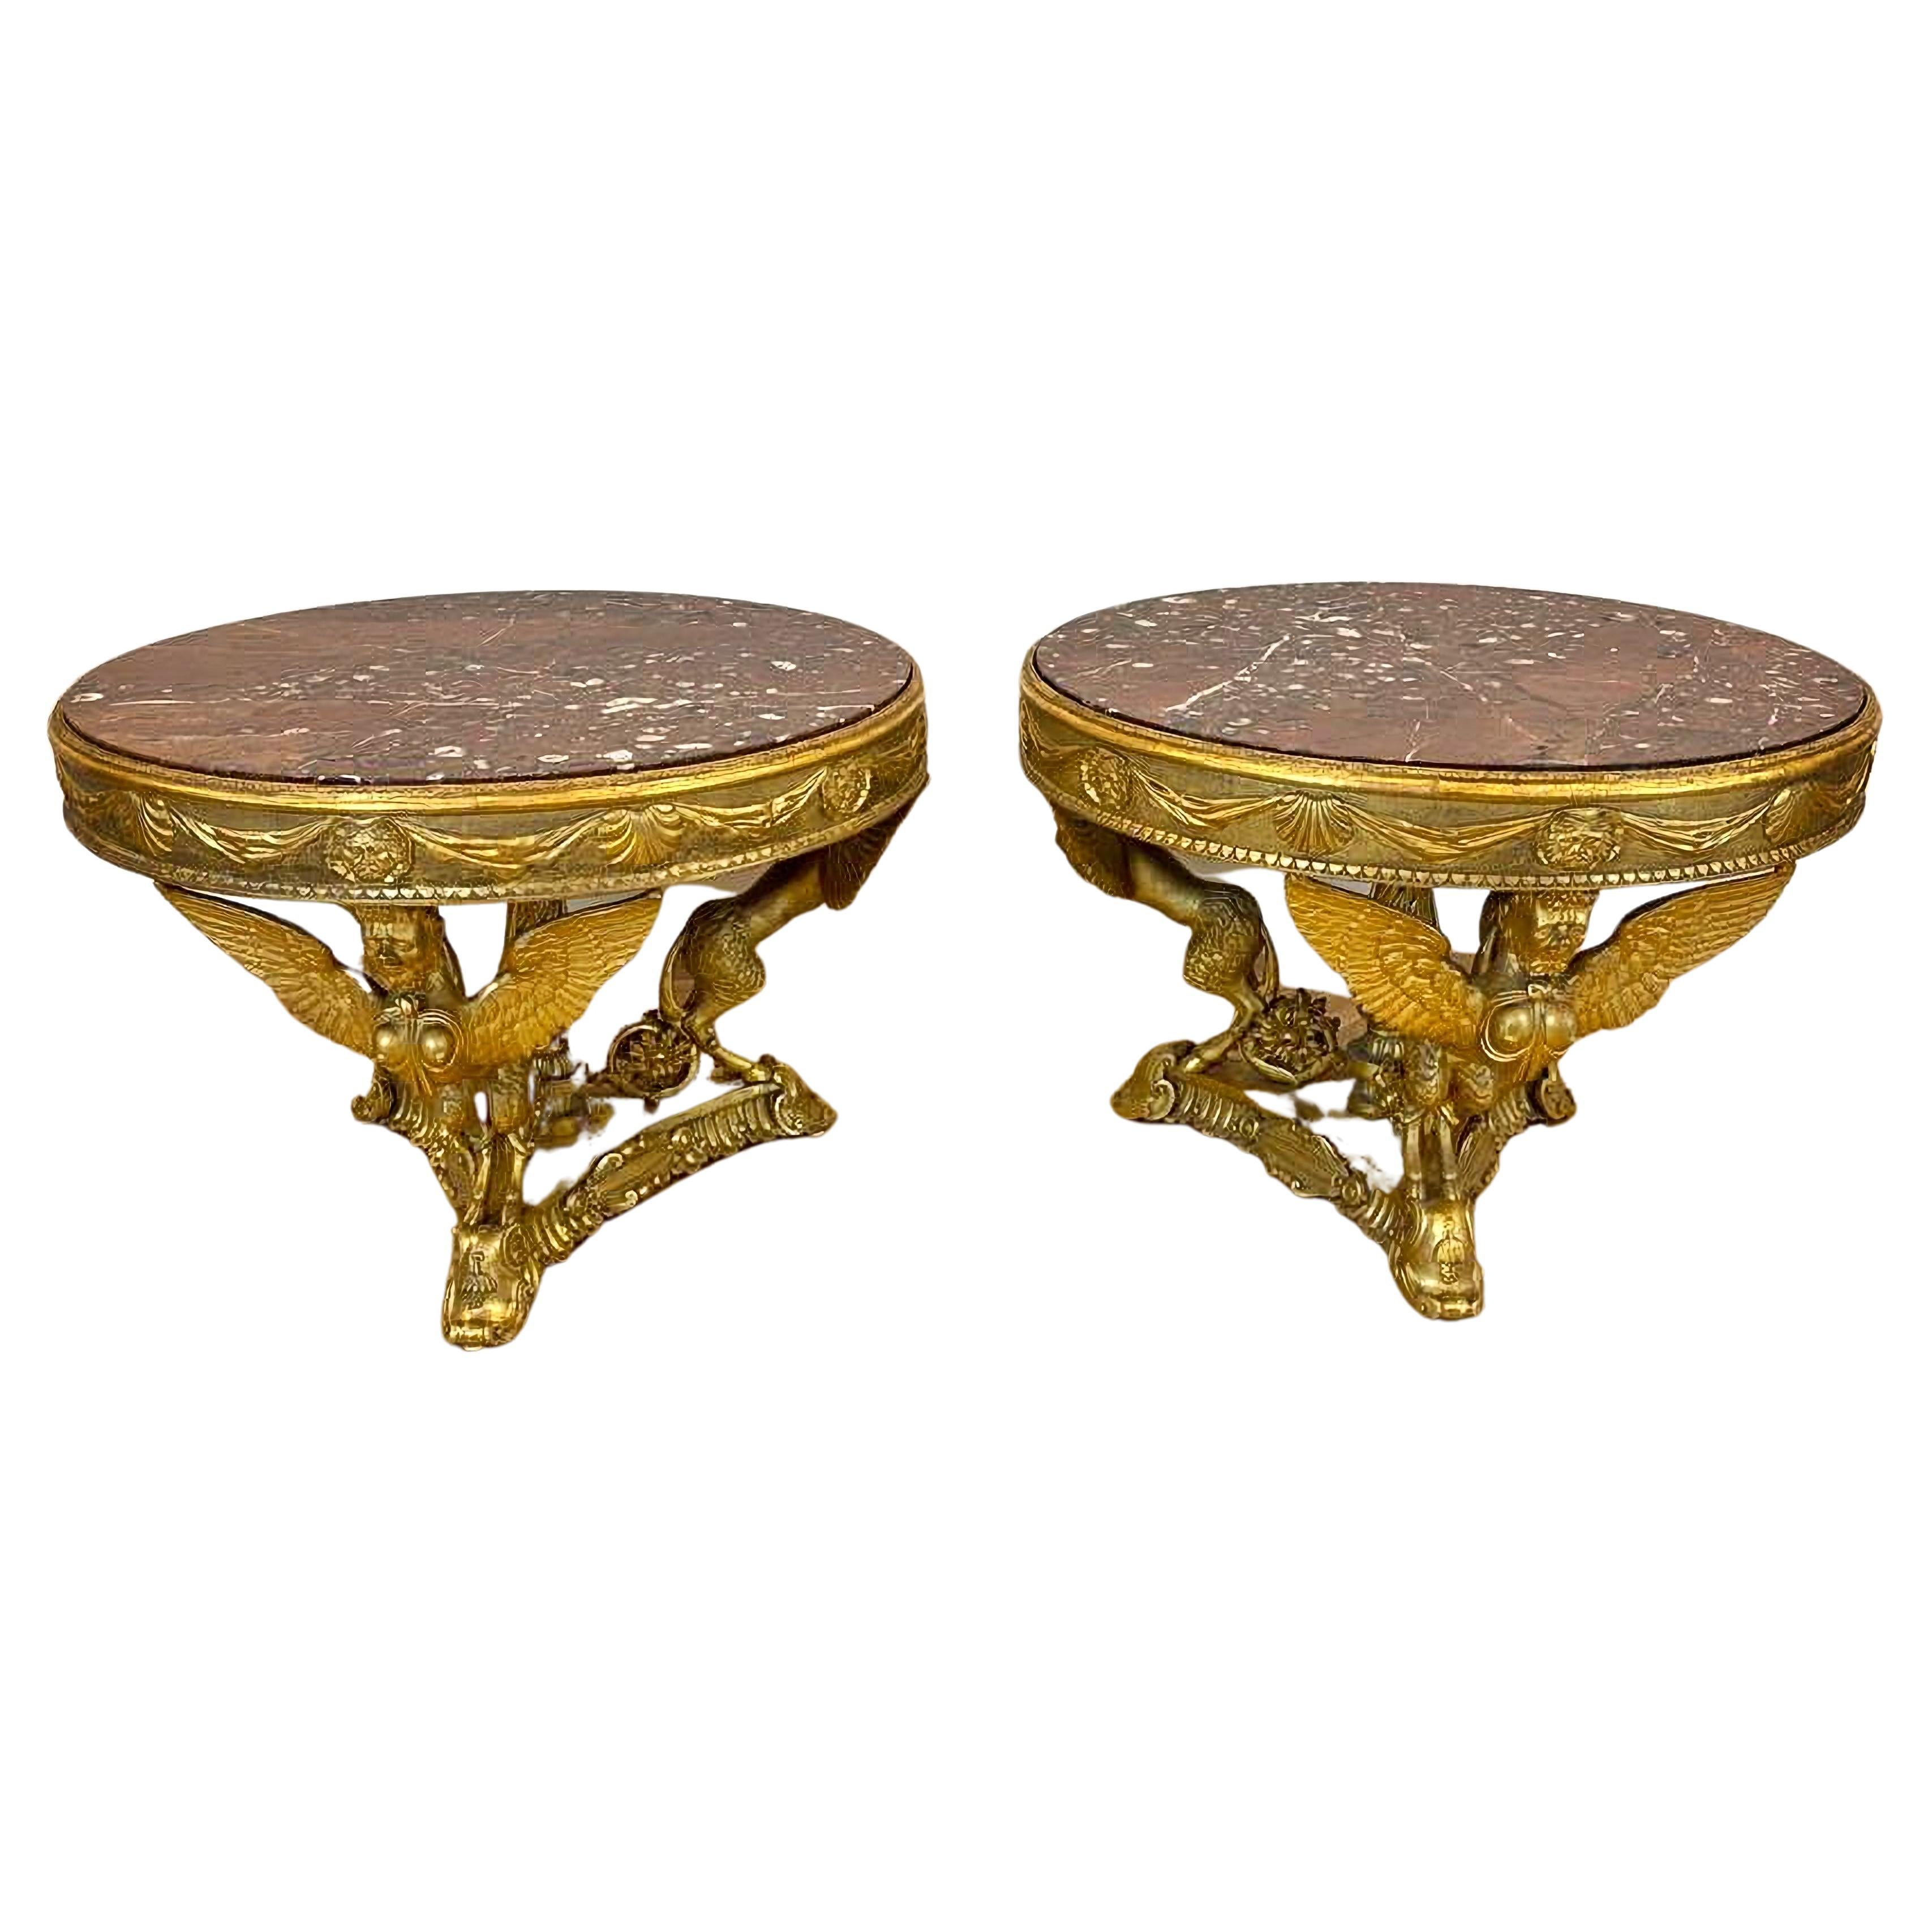 Impressive Pair of Tables First Empire Napoleon III Early 19th Century